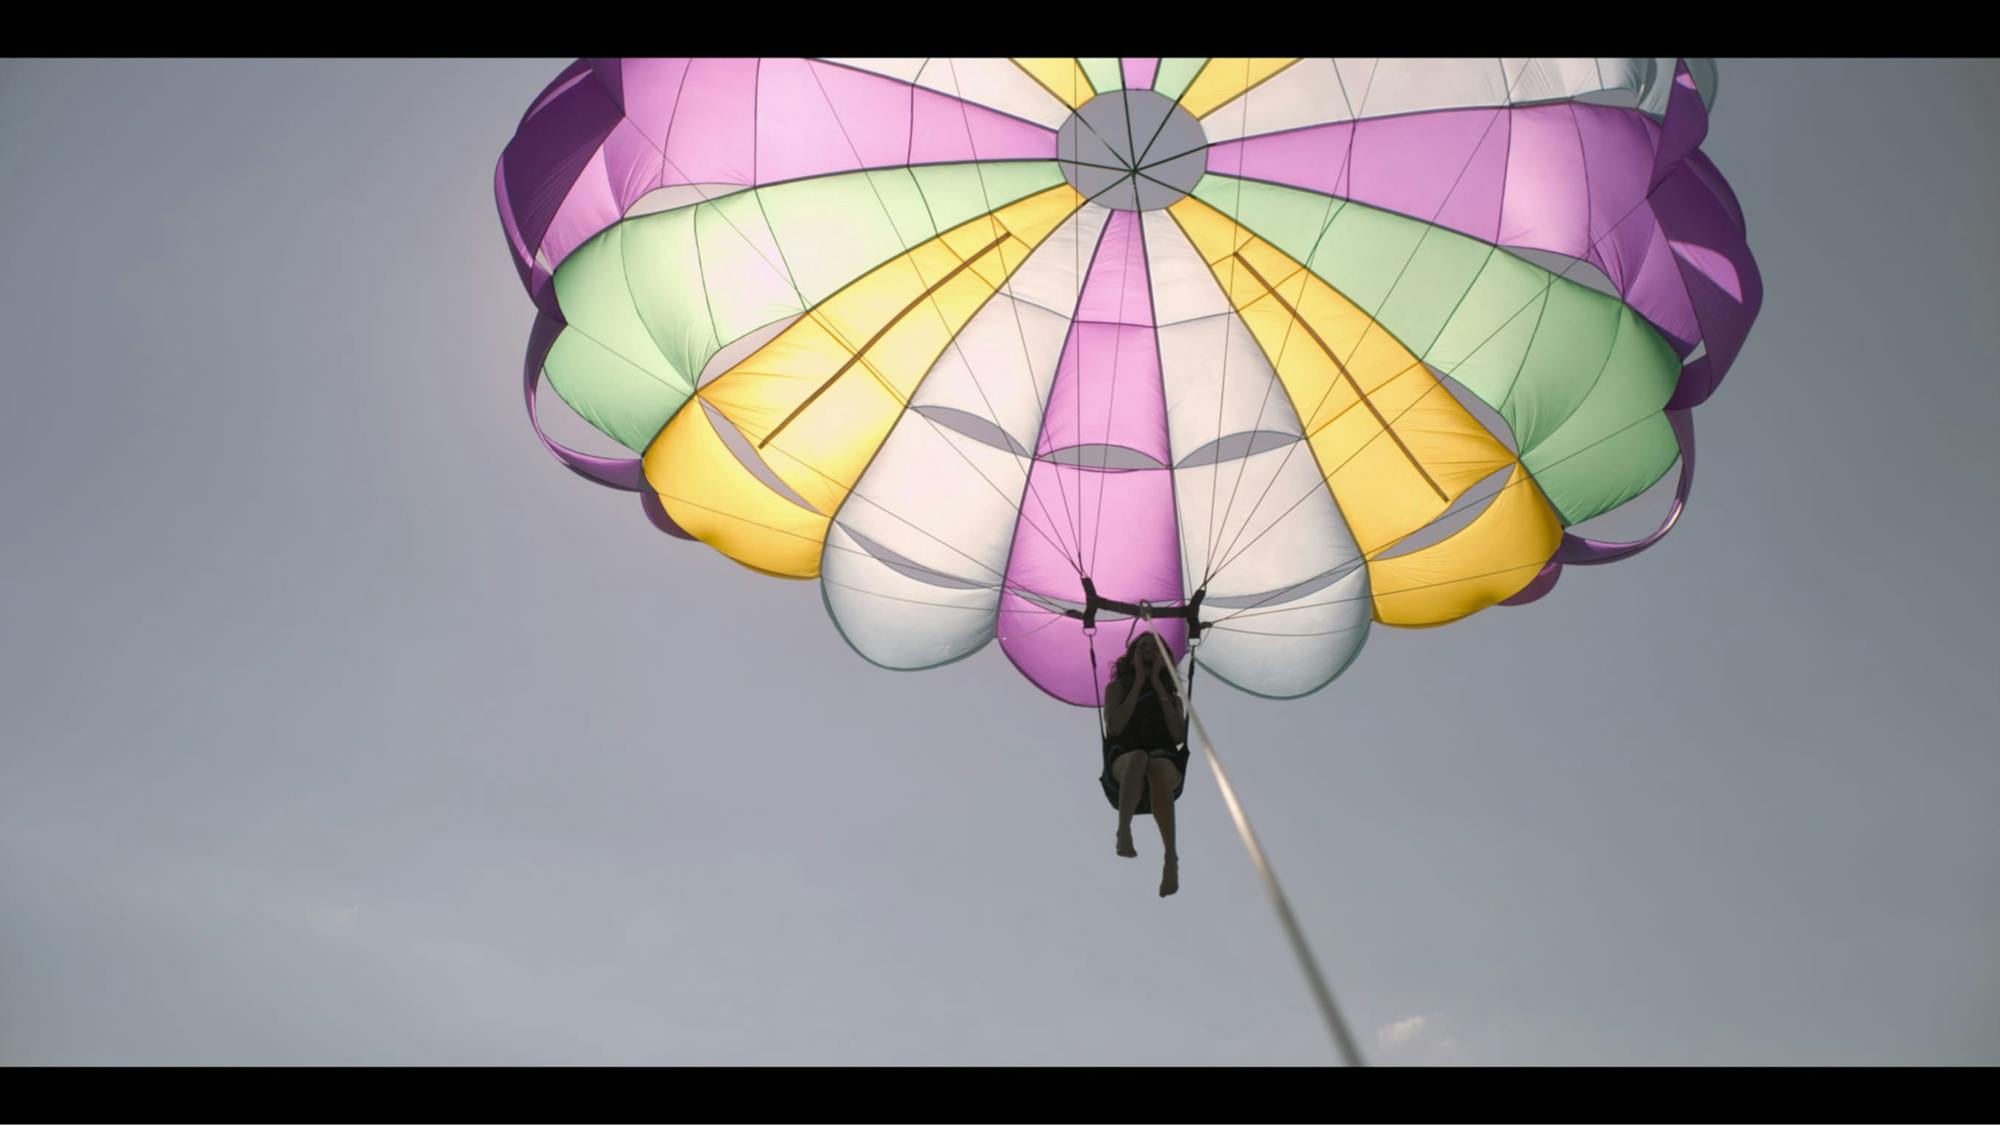 Sara (Ximena Lamadrid) parasails in a clear blue sky. Her contraption is purple, white, yellow, and green. Her figure is shadowy but you can sense her excitement from her hands framing her face.